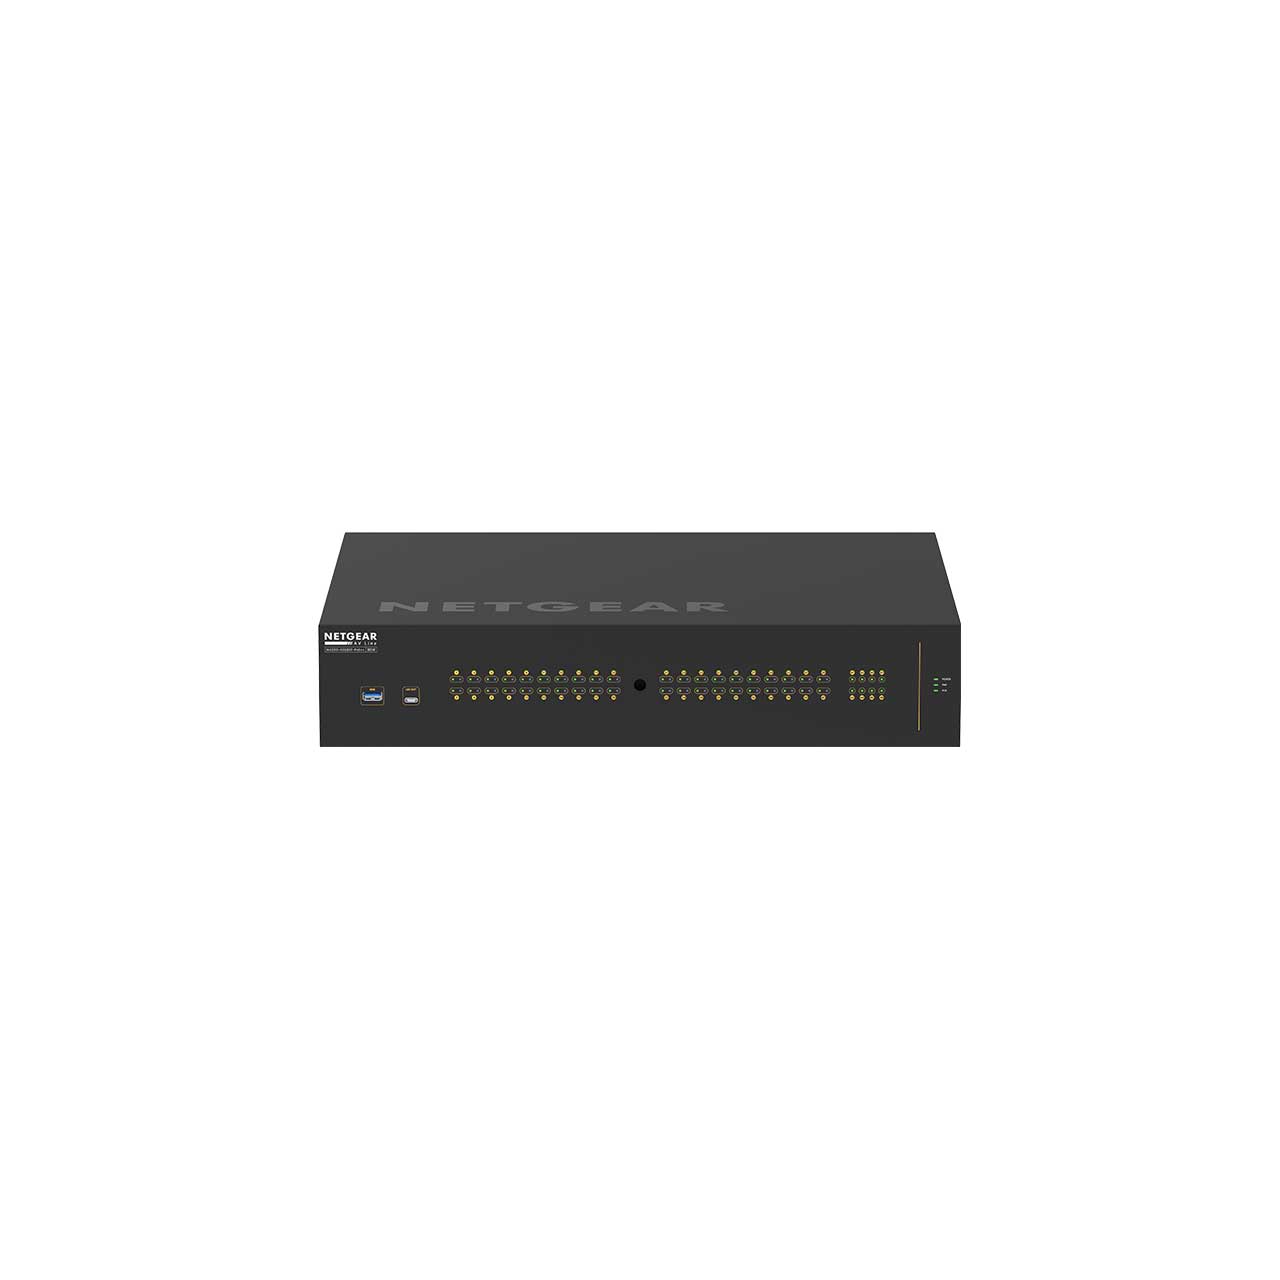 Netgear GSM4248UX-100NAS Managed Ethernet Switch with 48 Ports (40 x 10/100/1000BASE-T Ultra90 and 8 x 1000/10GBASE-X) GSM4248UX-100NAS